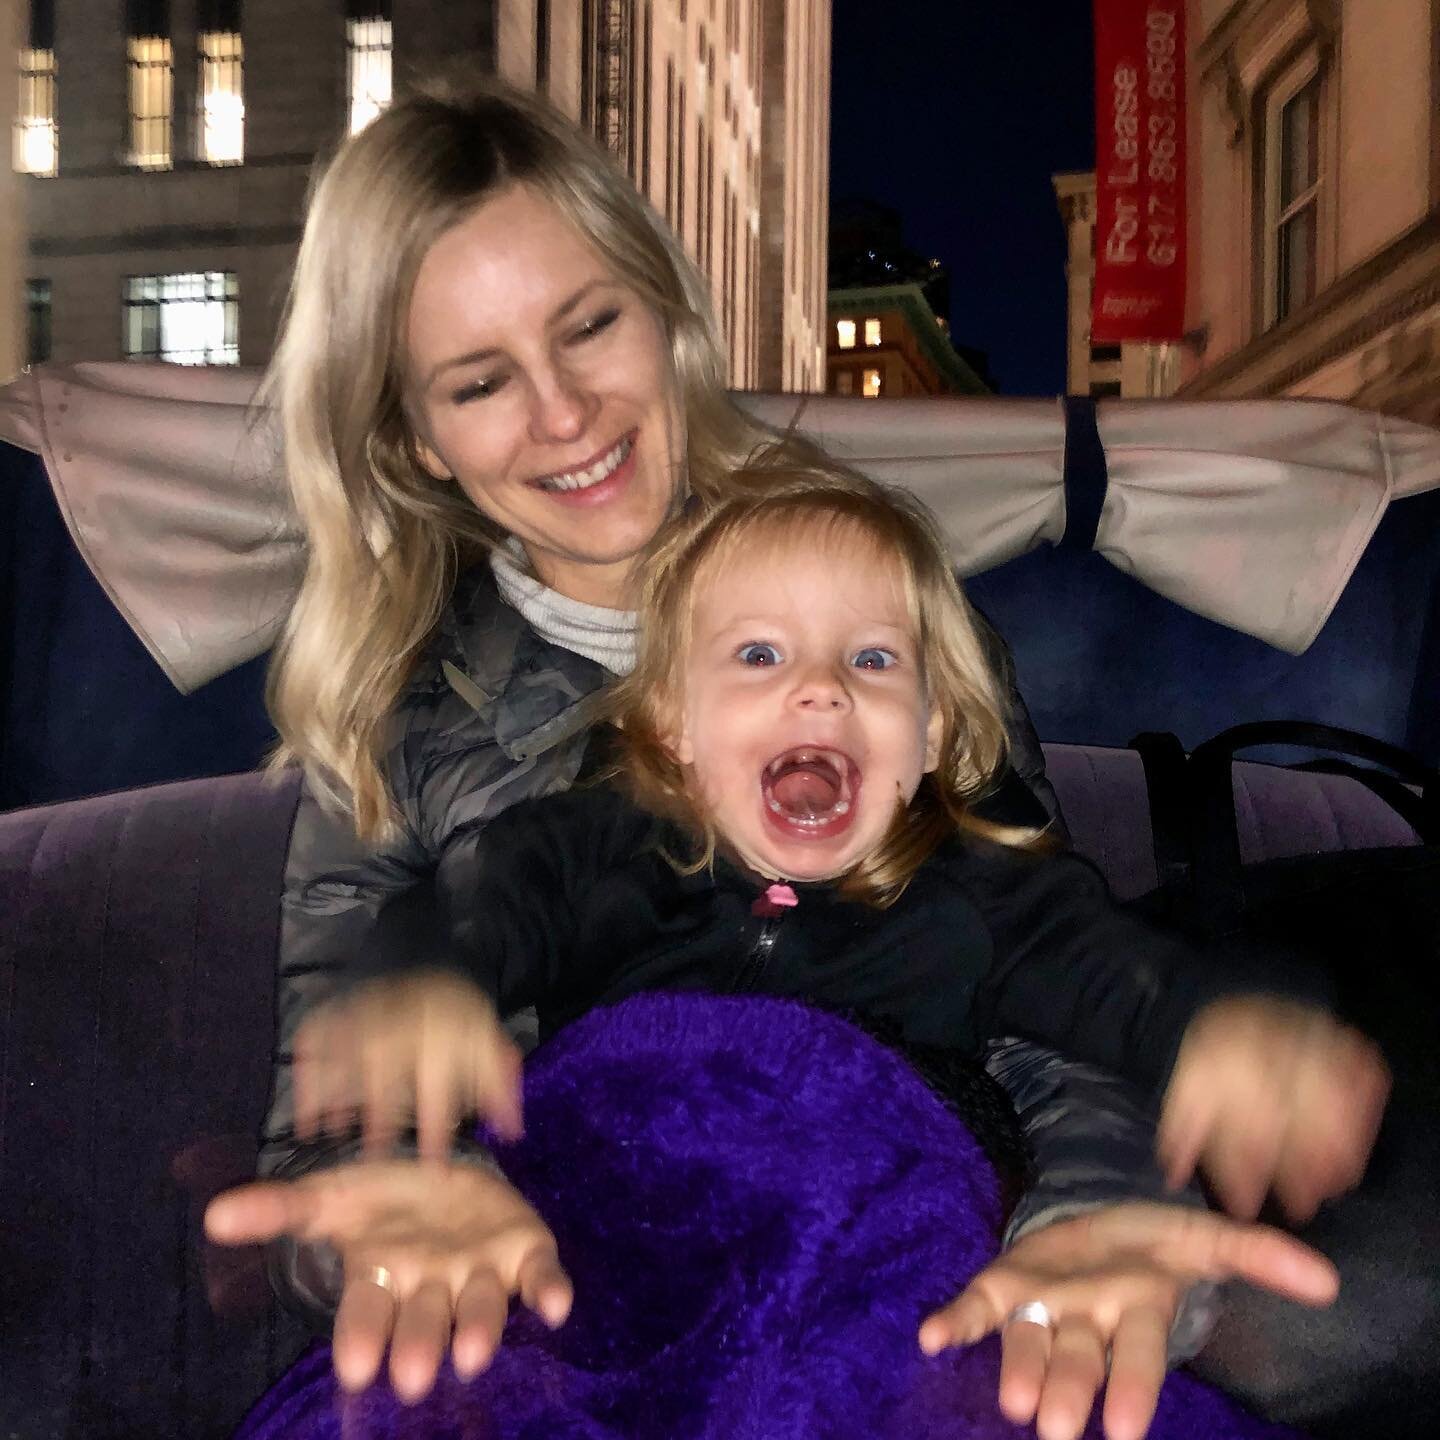 Safe to say @whereevieeats enjoyed the carriage ride 😂